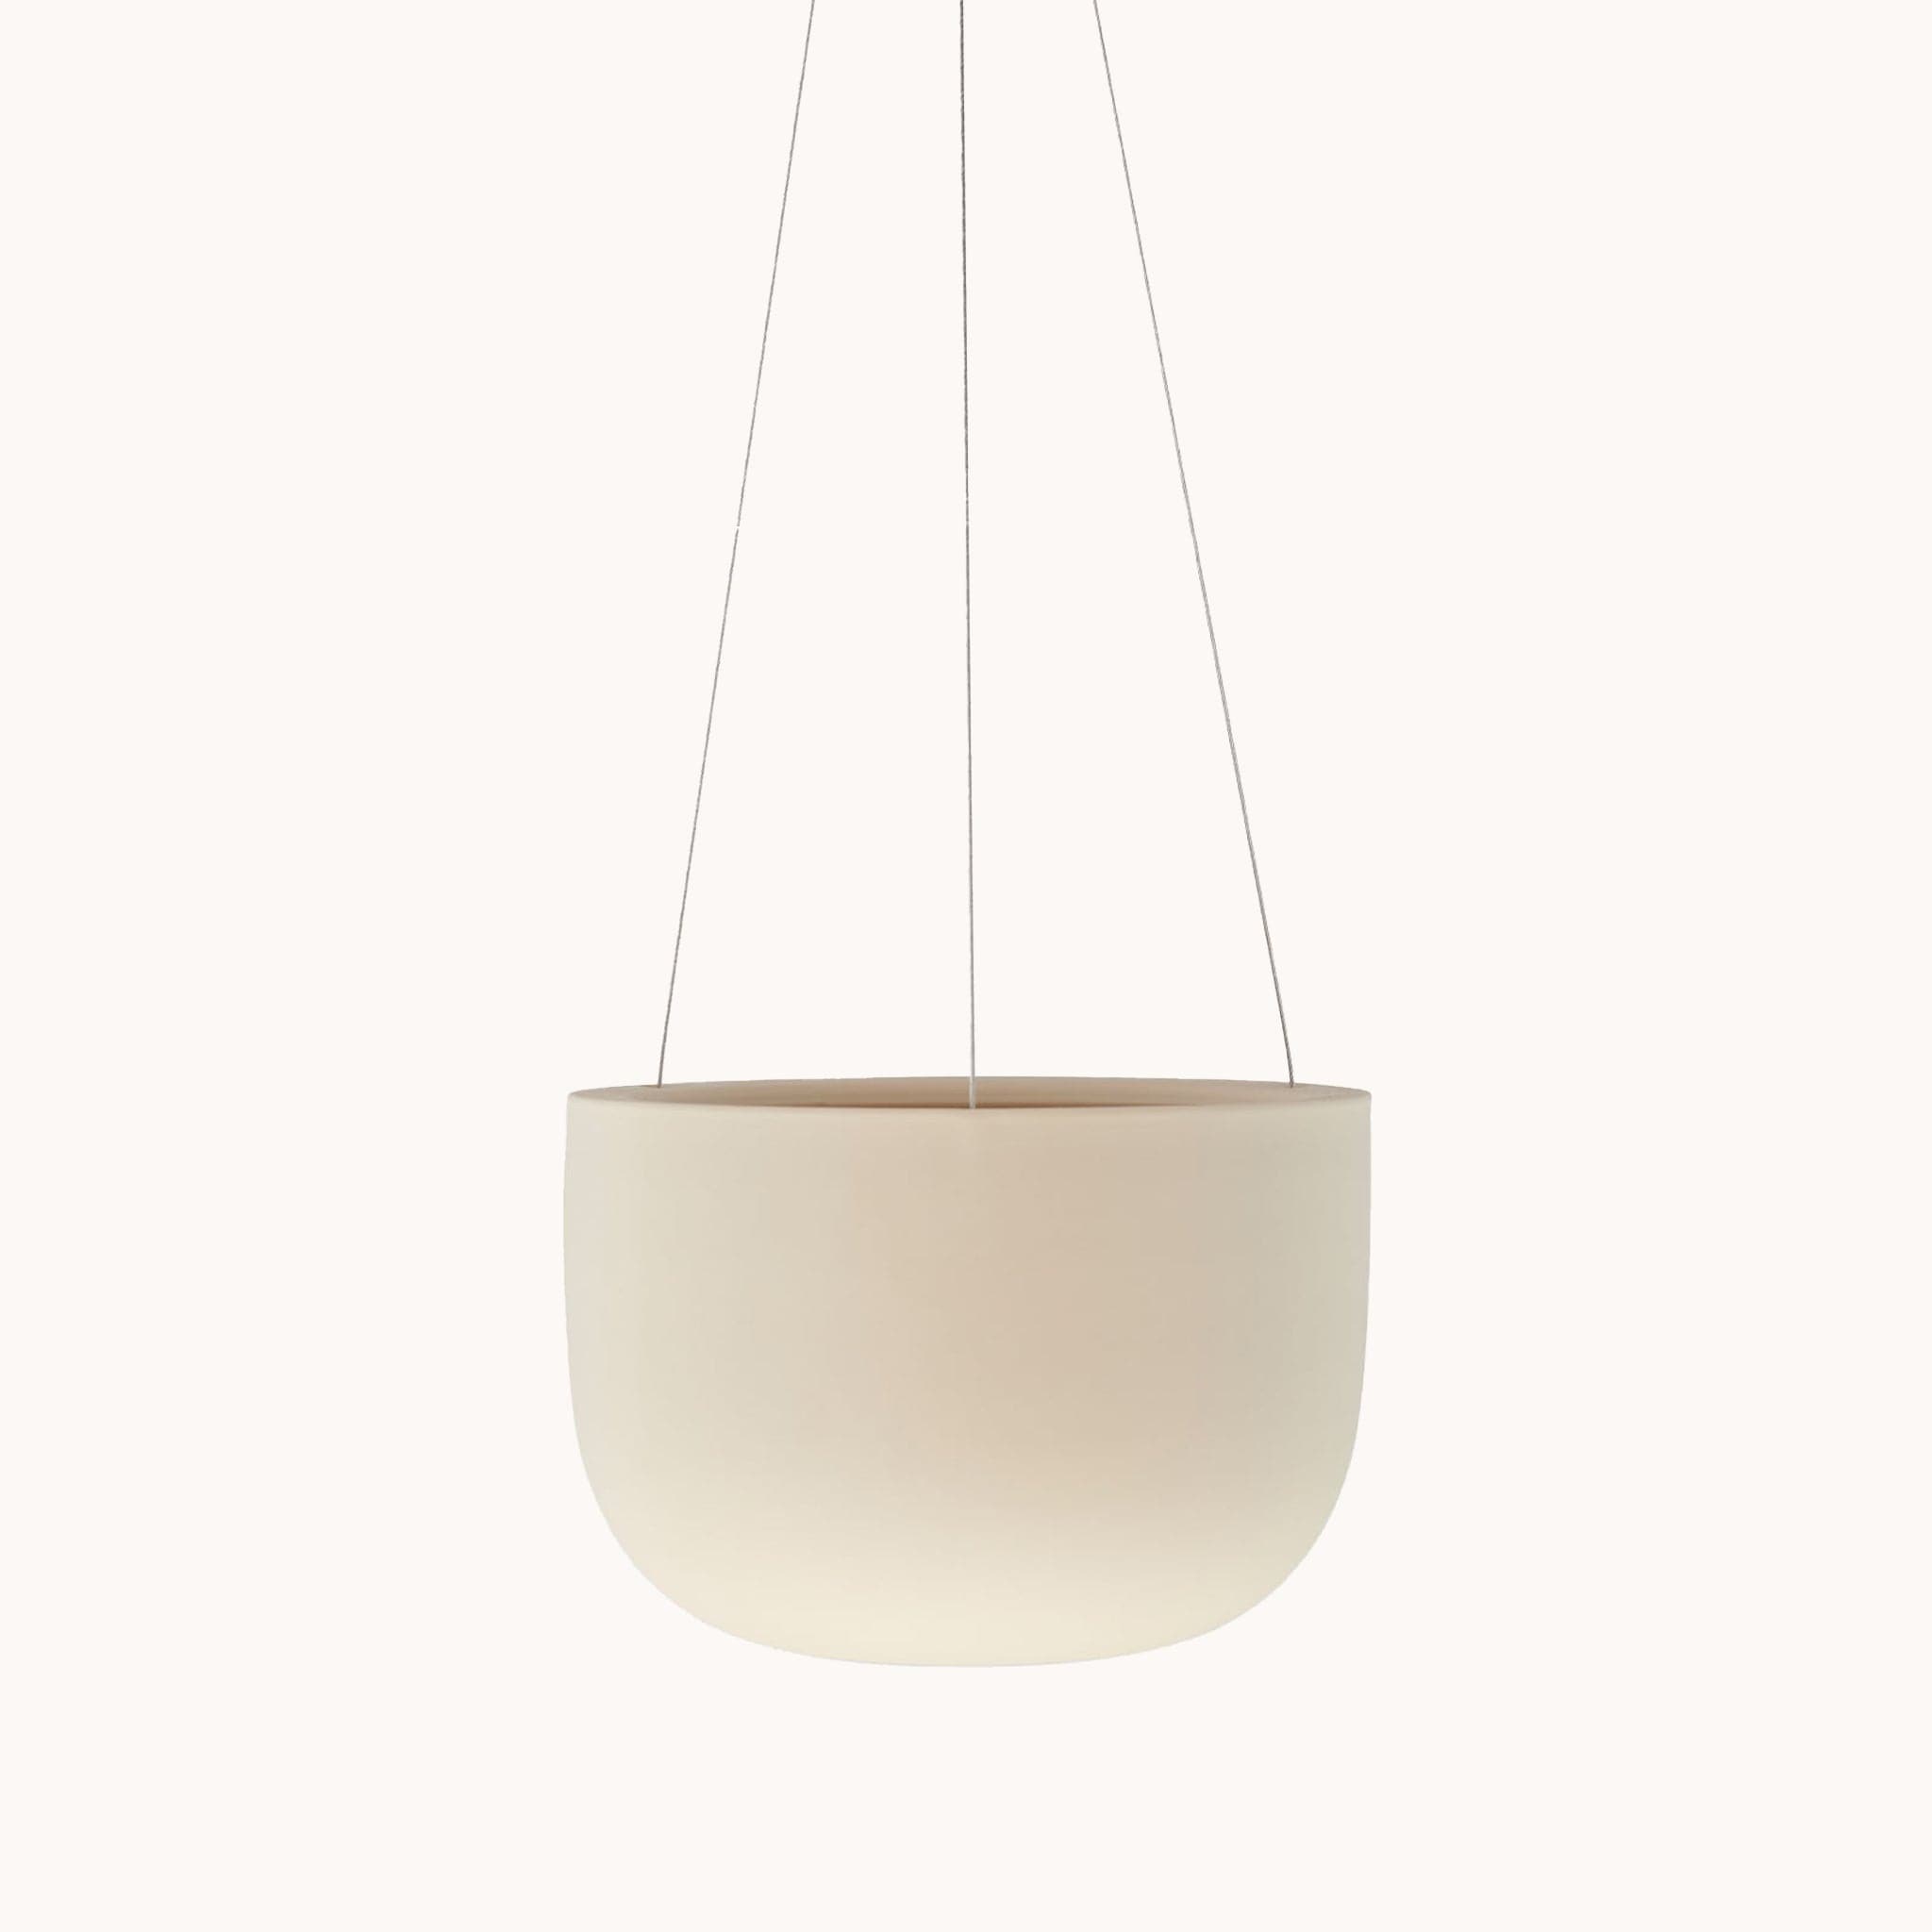 Hanging in front of a white background is a light tan hanging pot. The pot is wide and round and slightly tapers at the bottom. The pot is being held by three silver wires.